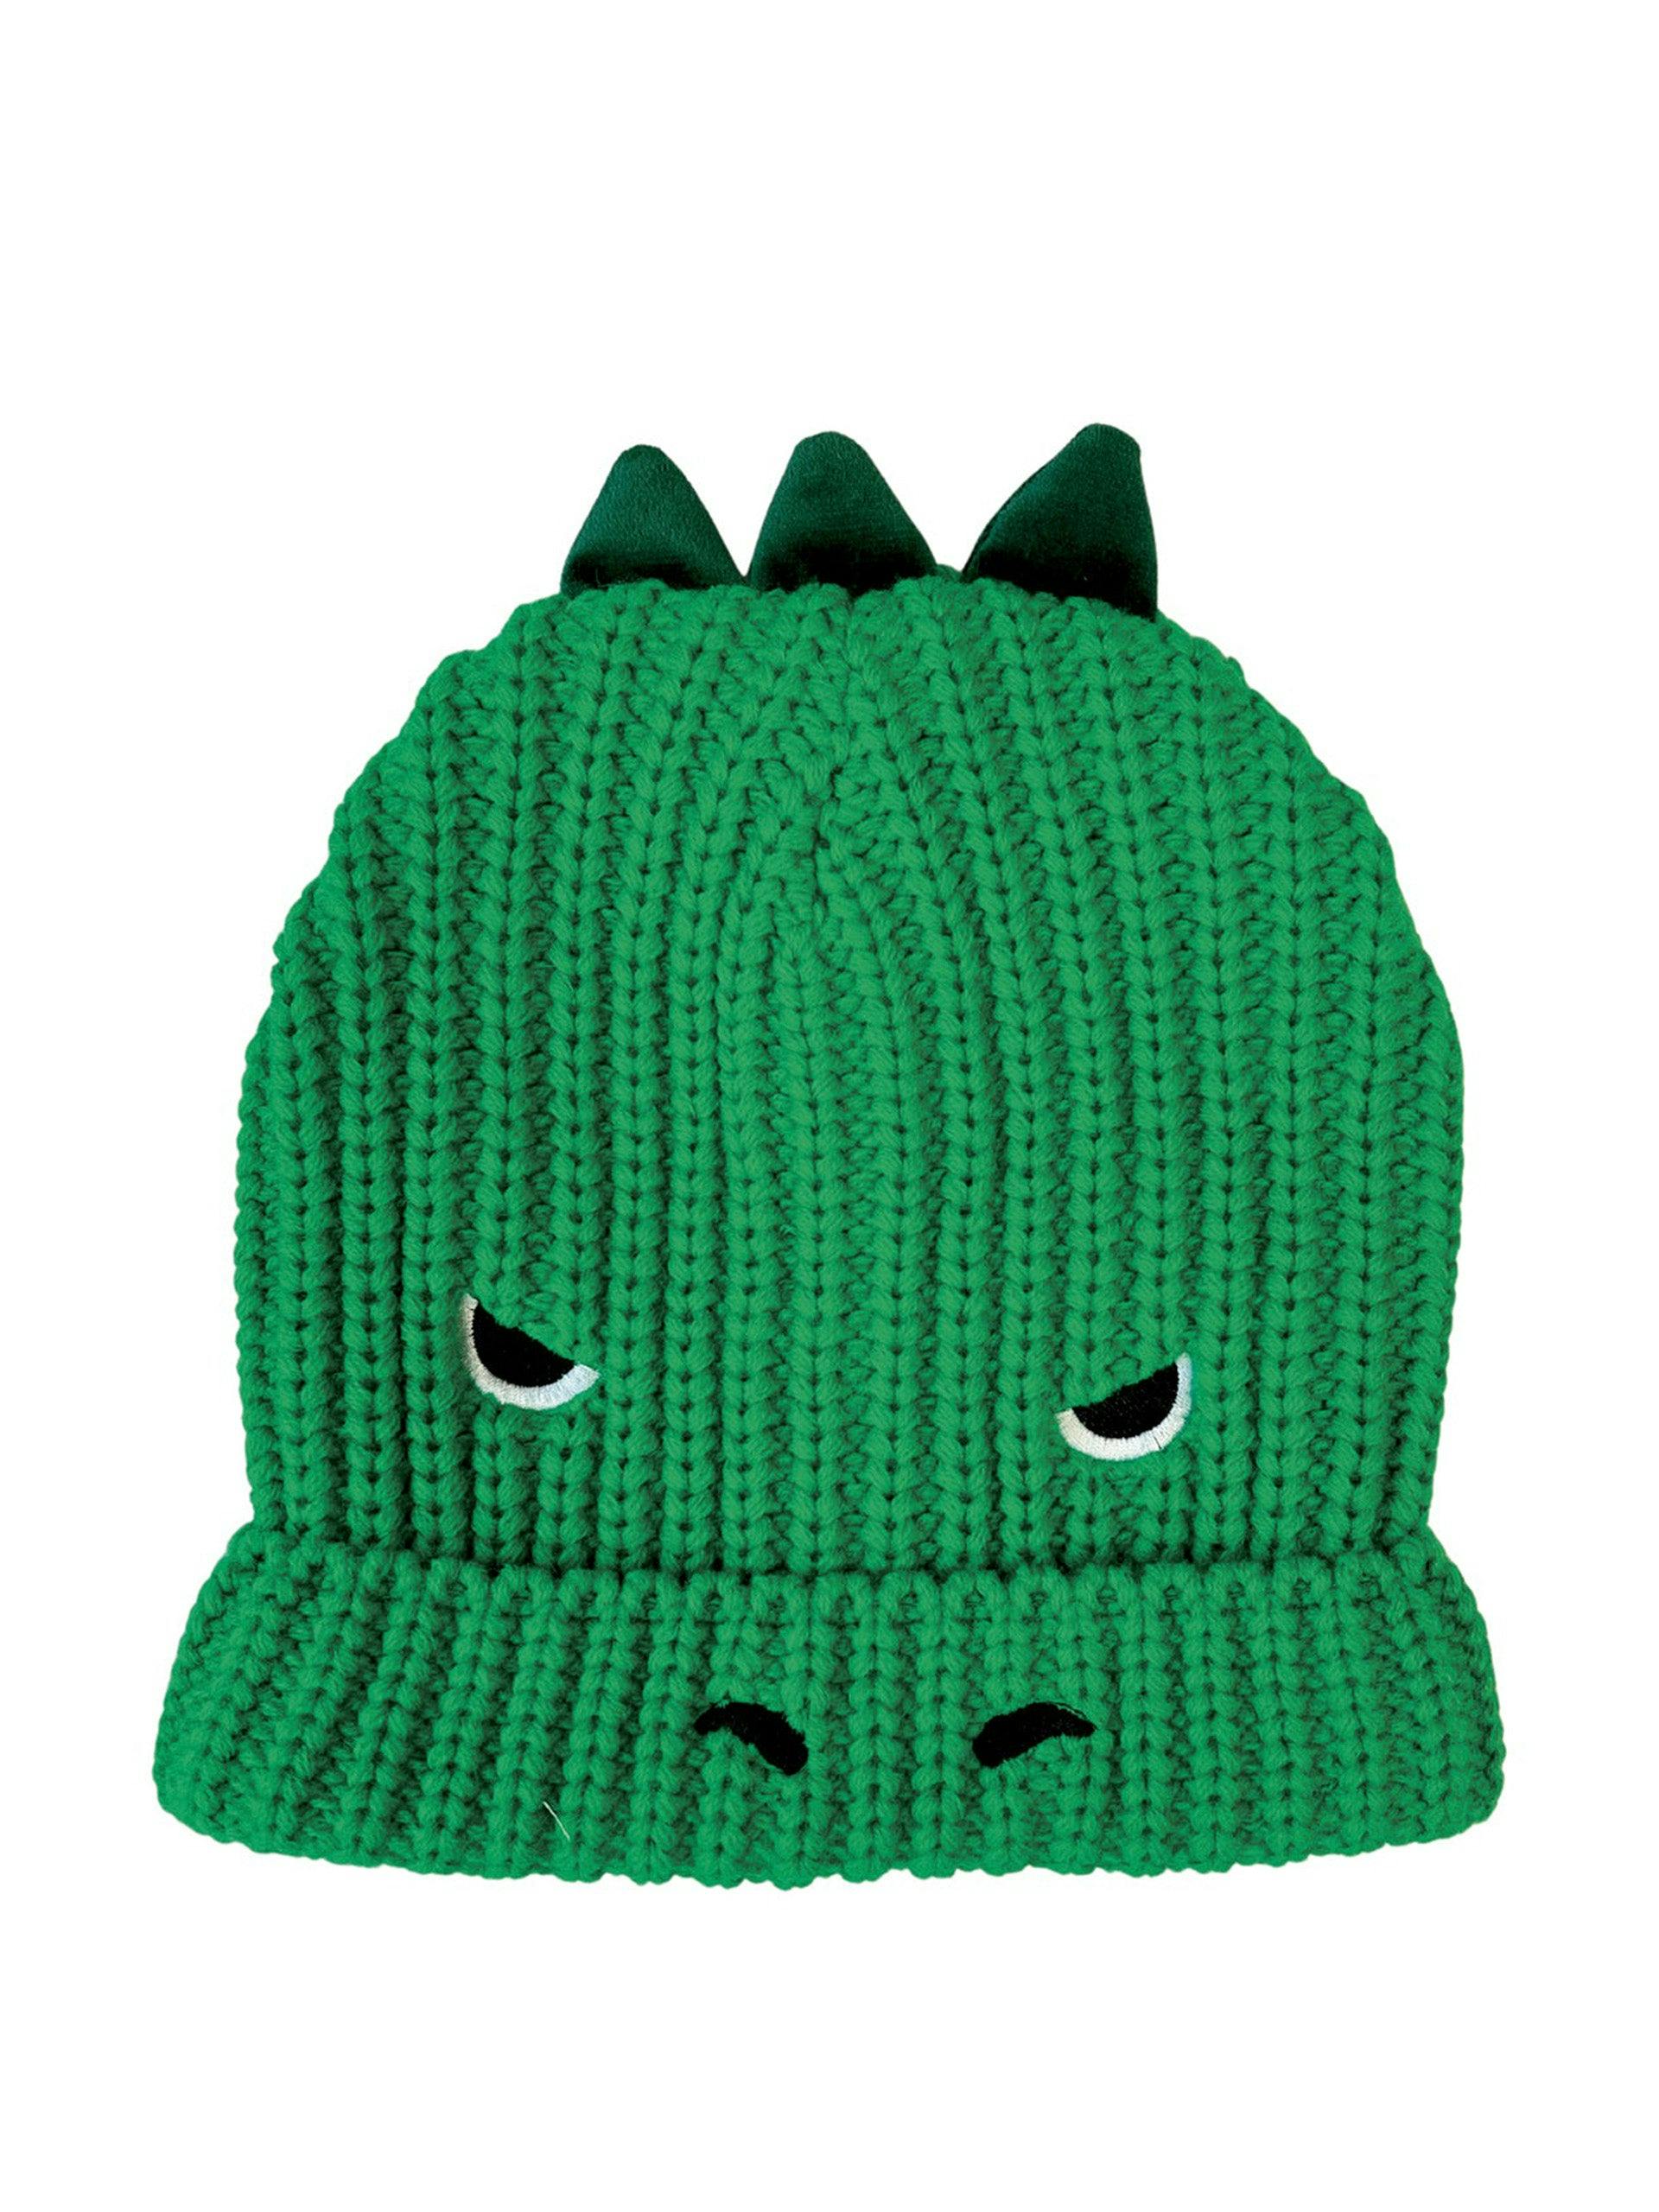 T-Rex knitted hat